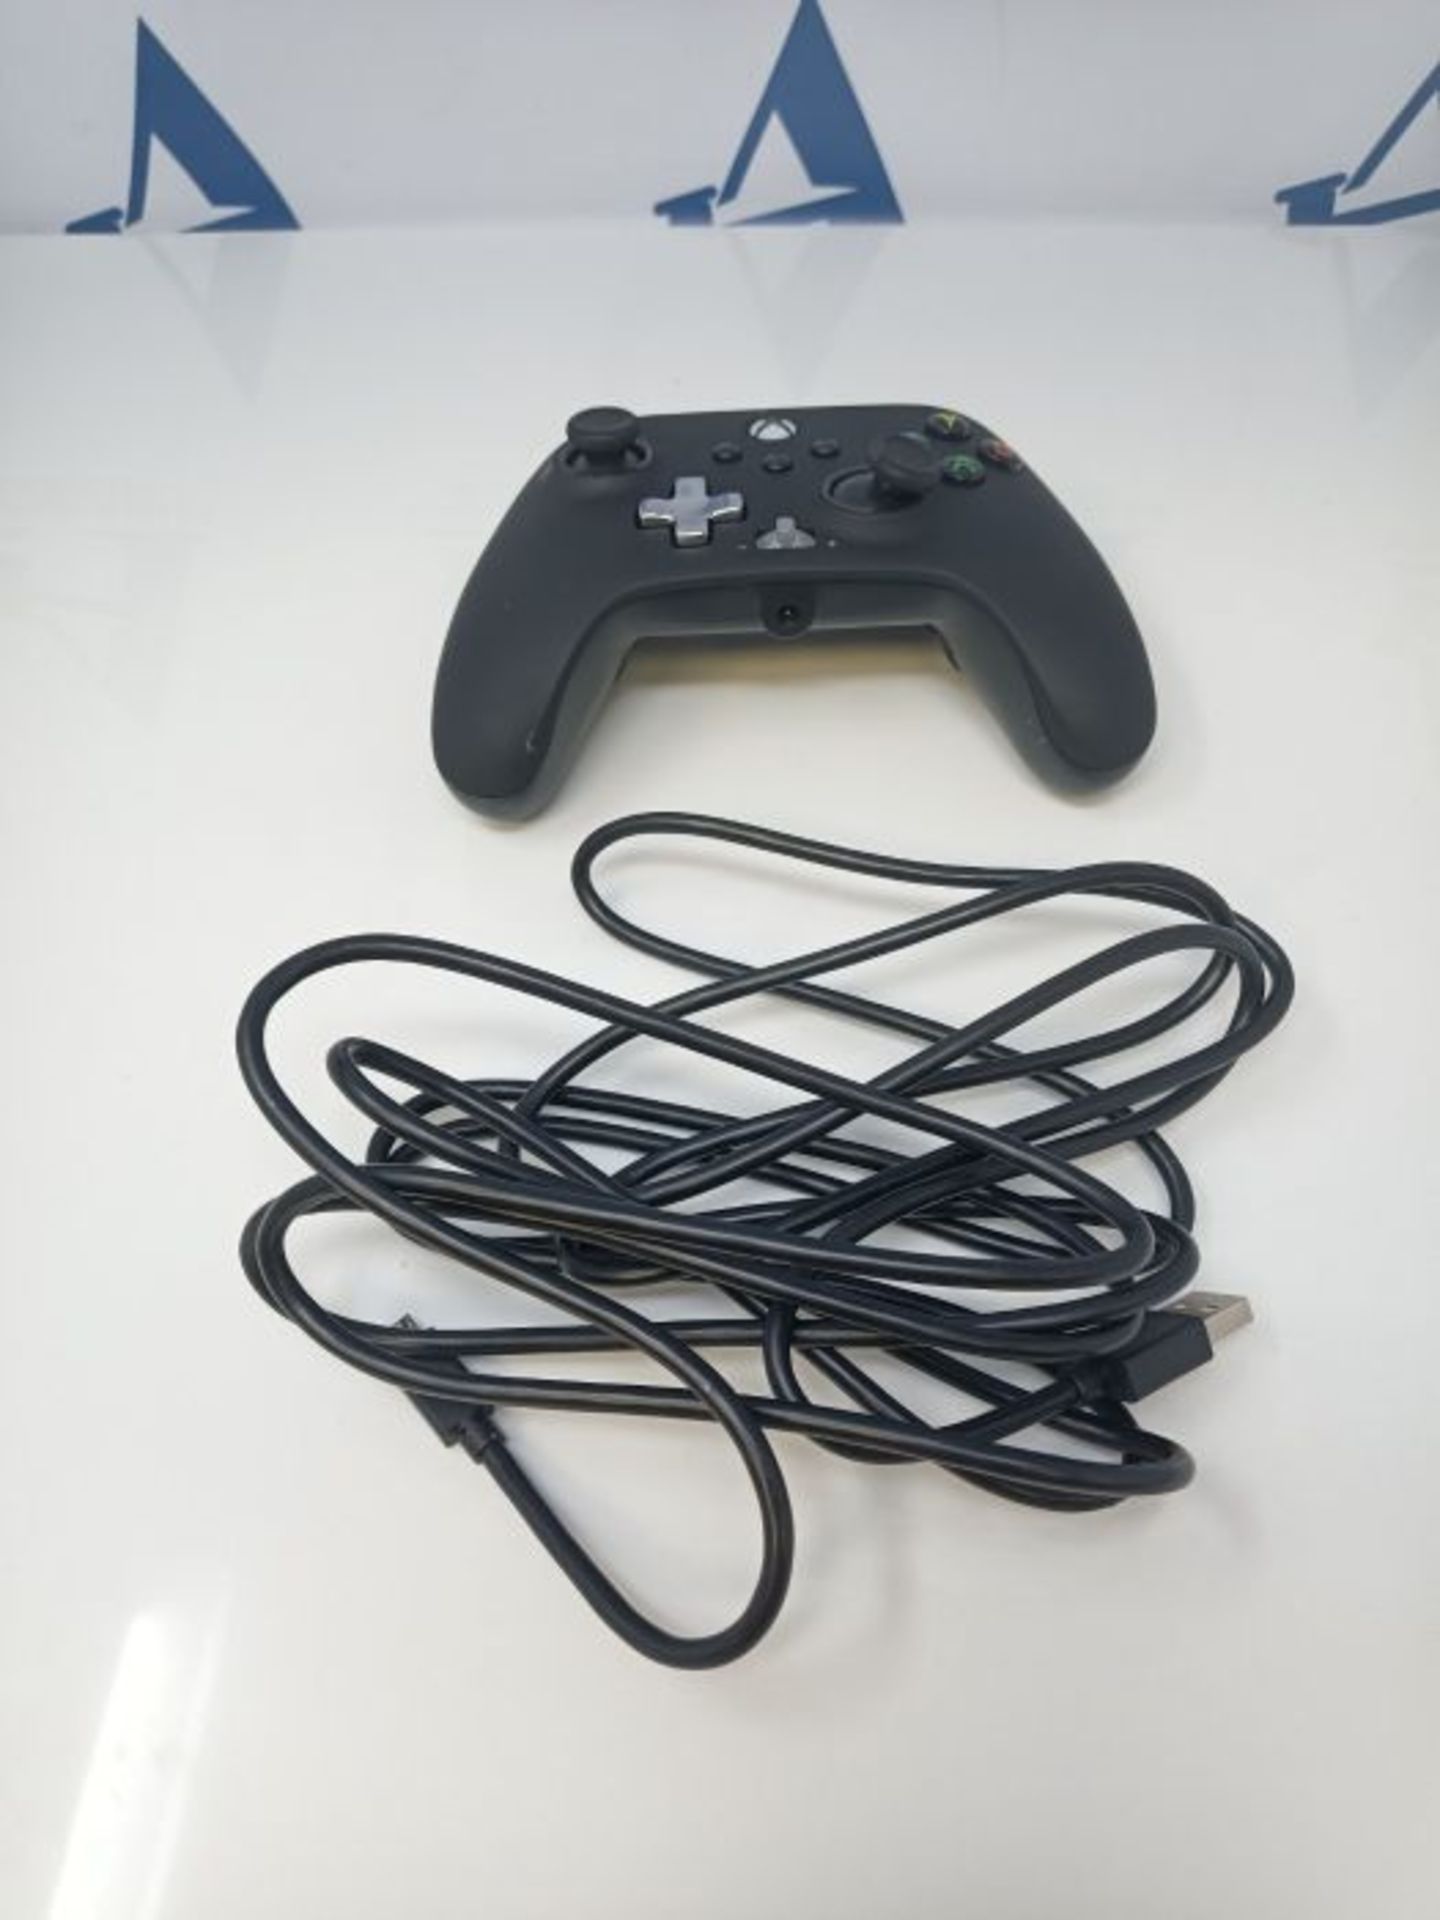 PowerA Enhanced Wired Controller for Xbox - Black Gamepad, Wired Video Game Controller - Image 3 of 3